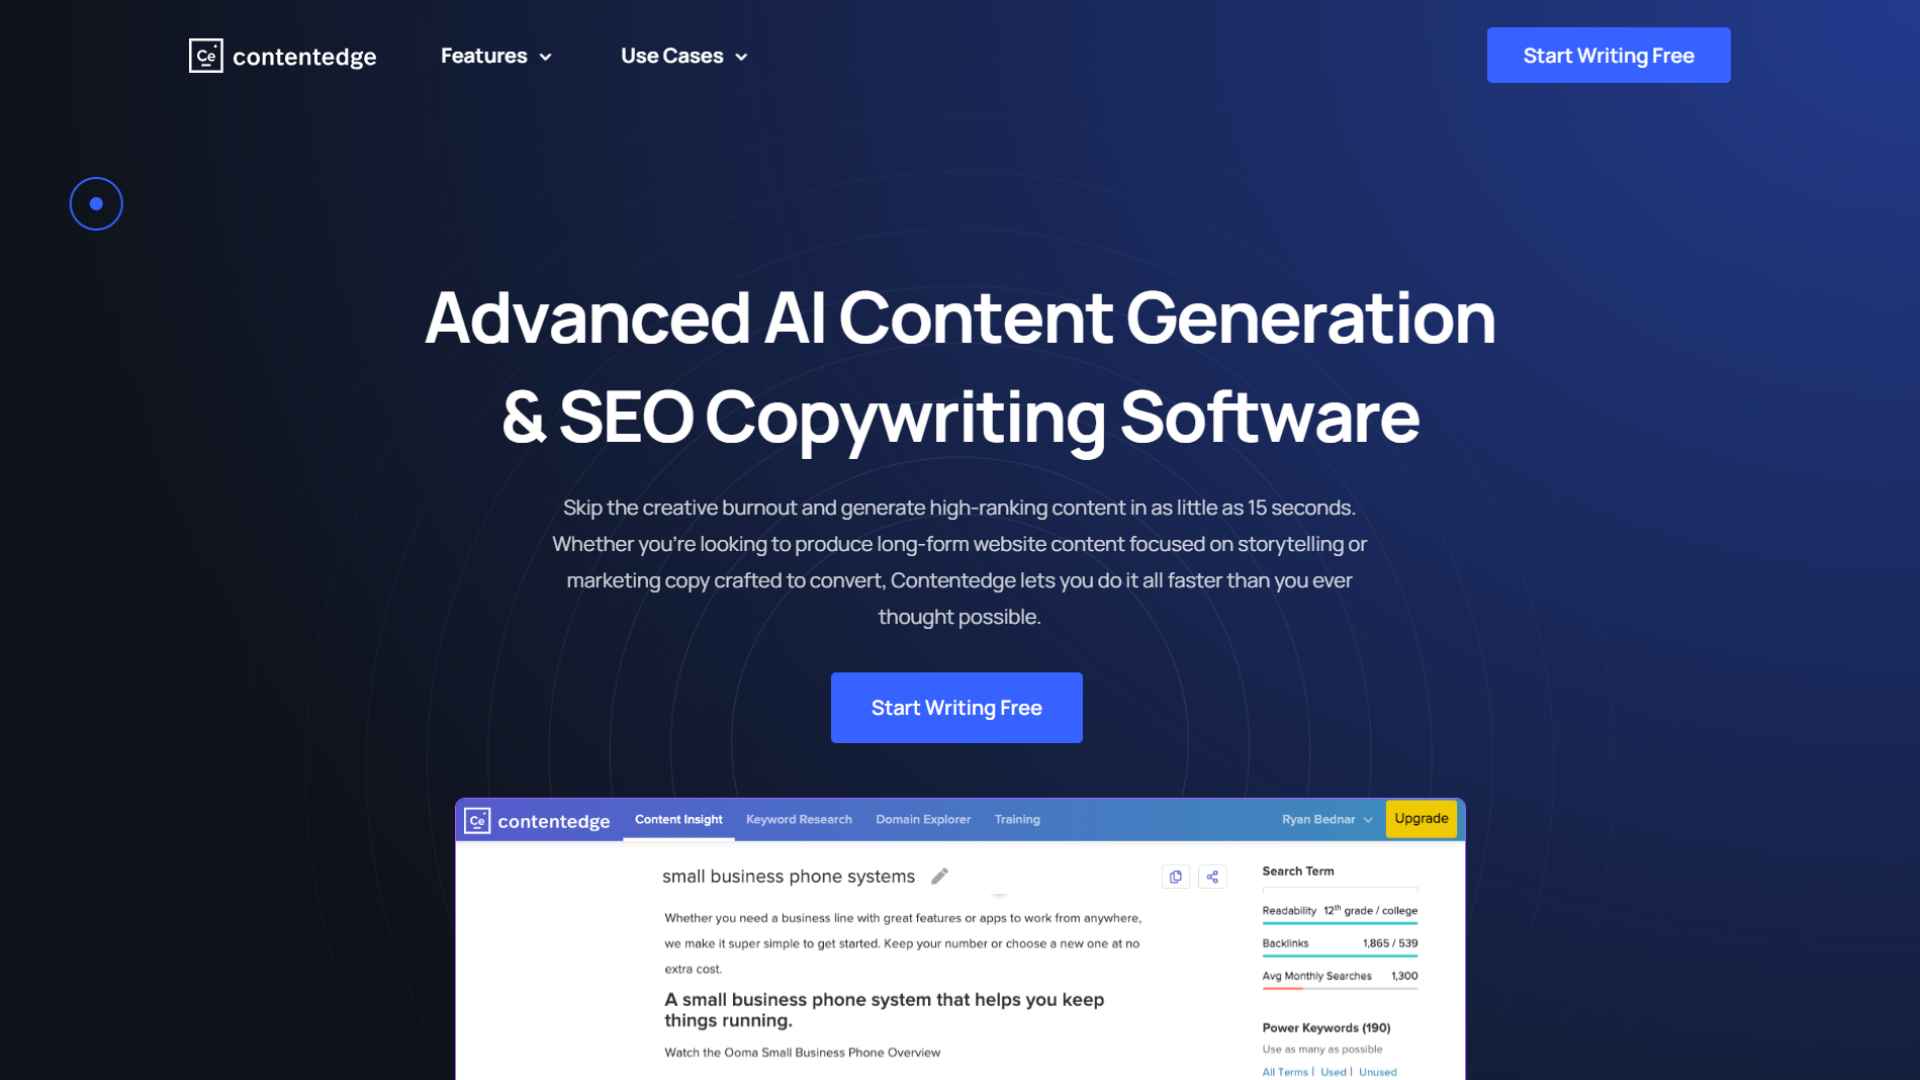 Unlock the Power of AI Copywriting & SEO with ContentEdge - Generate Engaging Content, Boost Rankings, and Save Time.